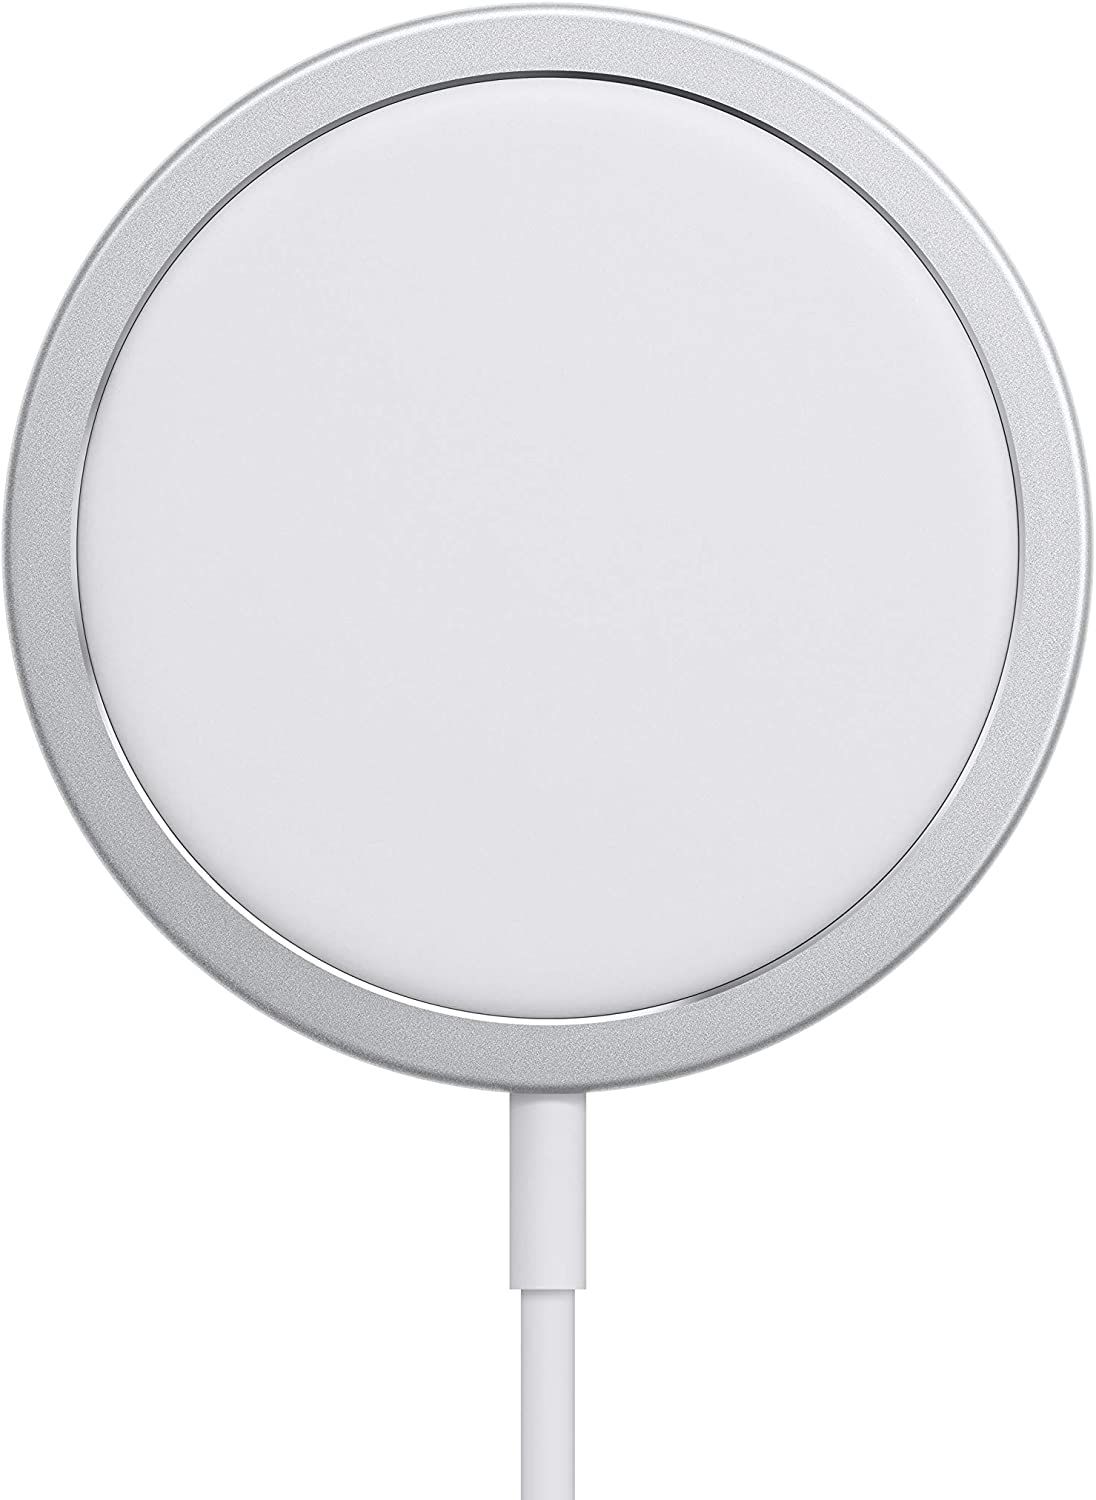 apple magsafe charger 1